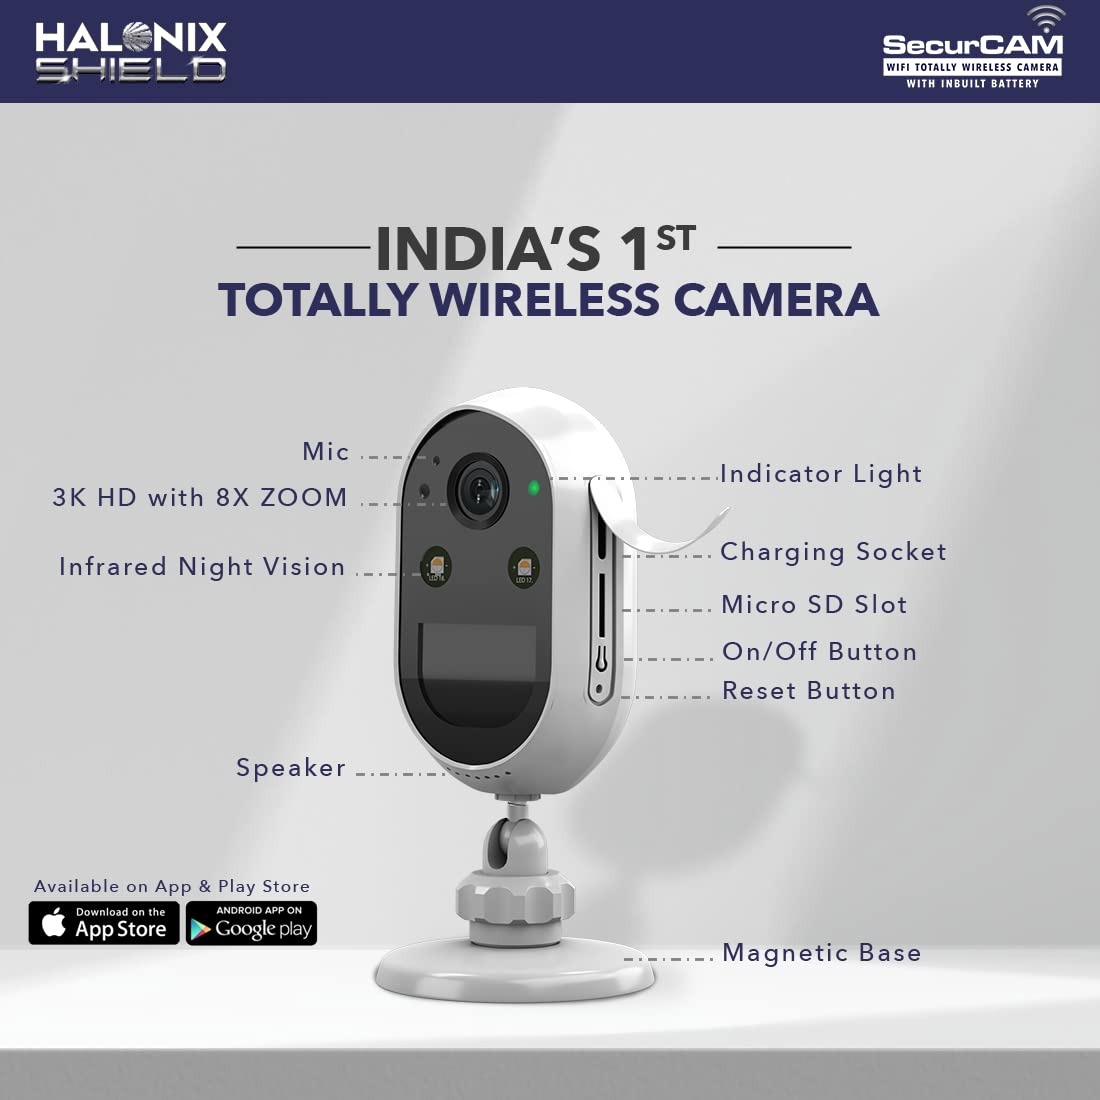 Halonix SecurCAM Totally Wireless 3MP 3K Pro HD Wi-Fi Smart Home Security Camera with Inbuilt Battery| 8X Digital Zoom| No Power Cord | No Screws/Drilling| 2 Way Audio| Colored Night Vision 2yr Full Replacement